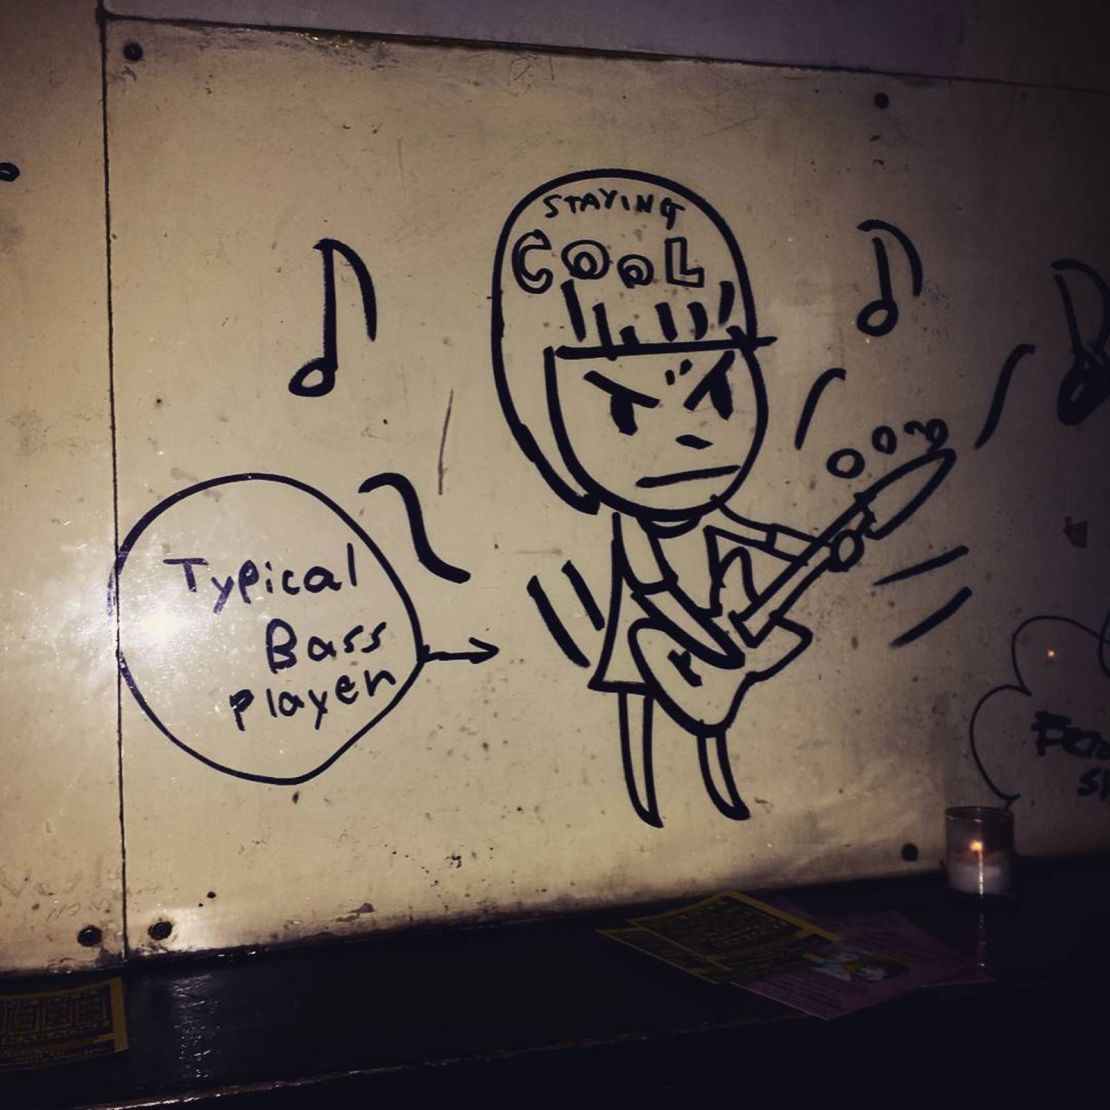 Nara's doodle of a "typical bass player."